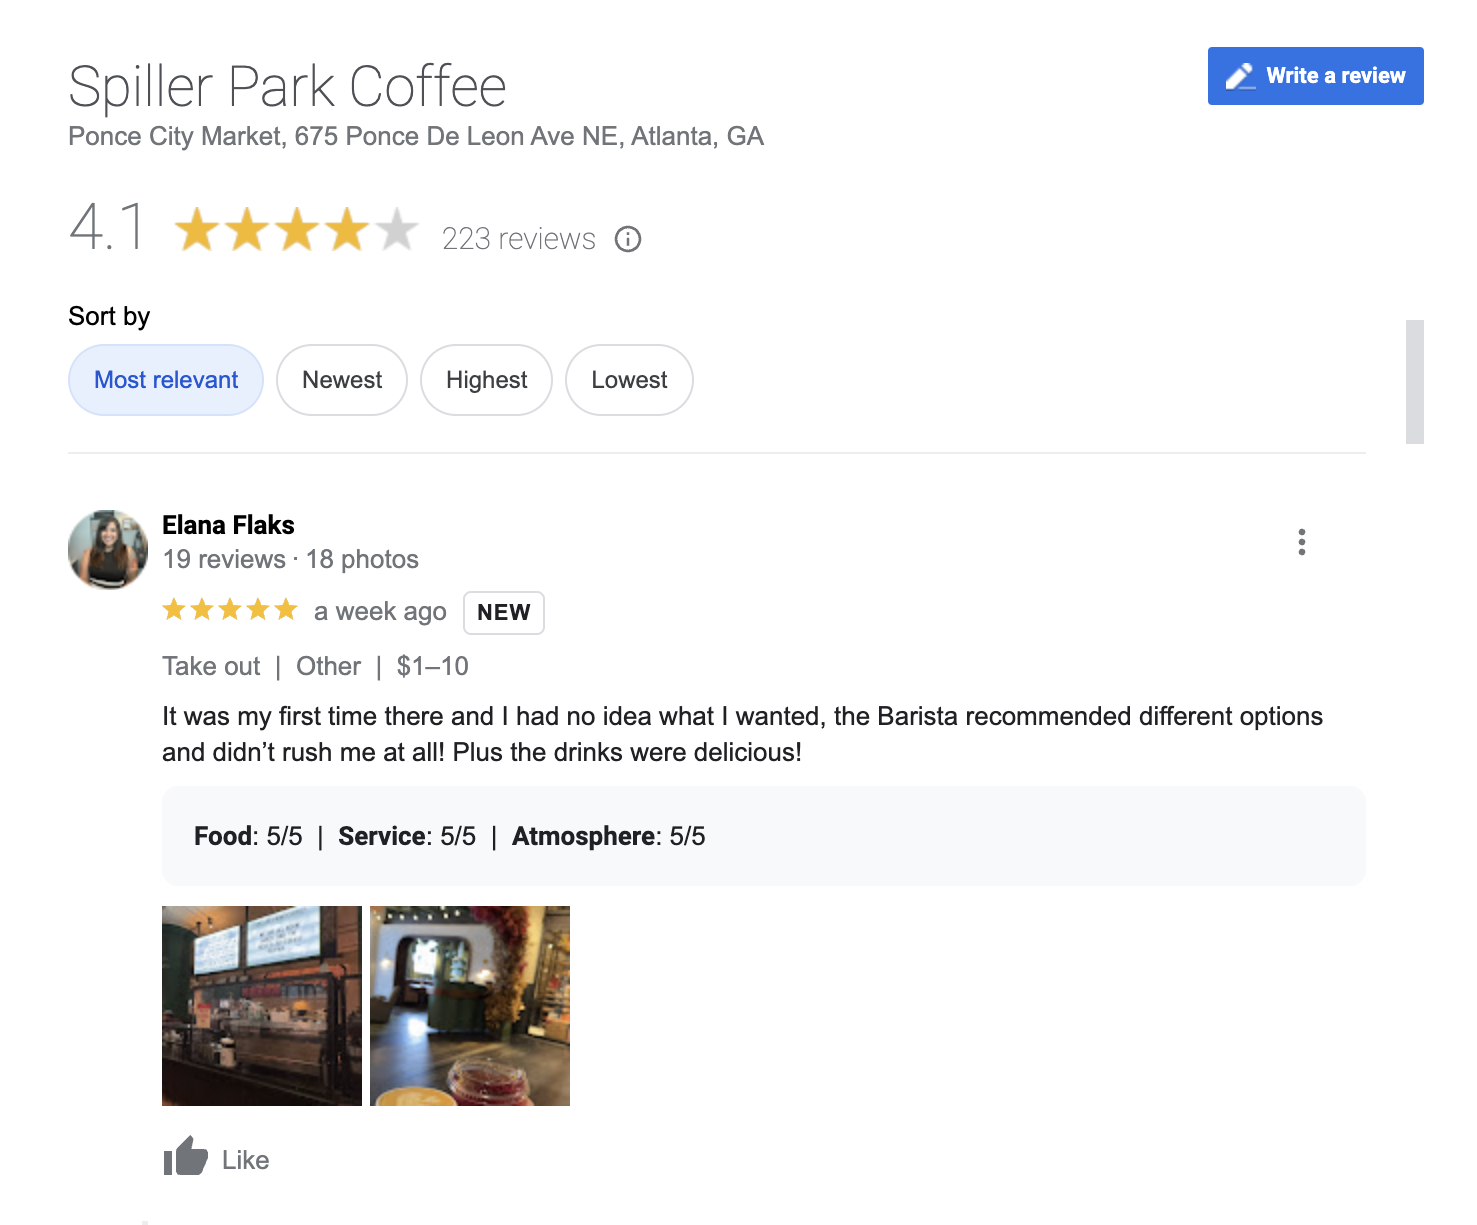 A customer giving positive feedback to Spiller Park Coffee via Google Reviews. The customer said it was their first time, the barista was patient and the drinks were delicious.